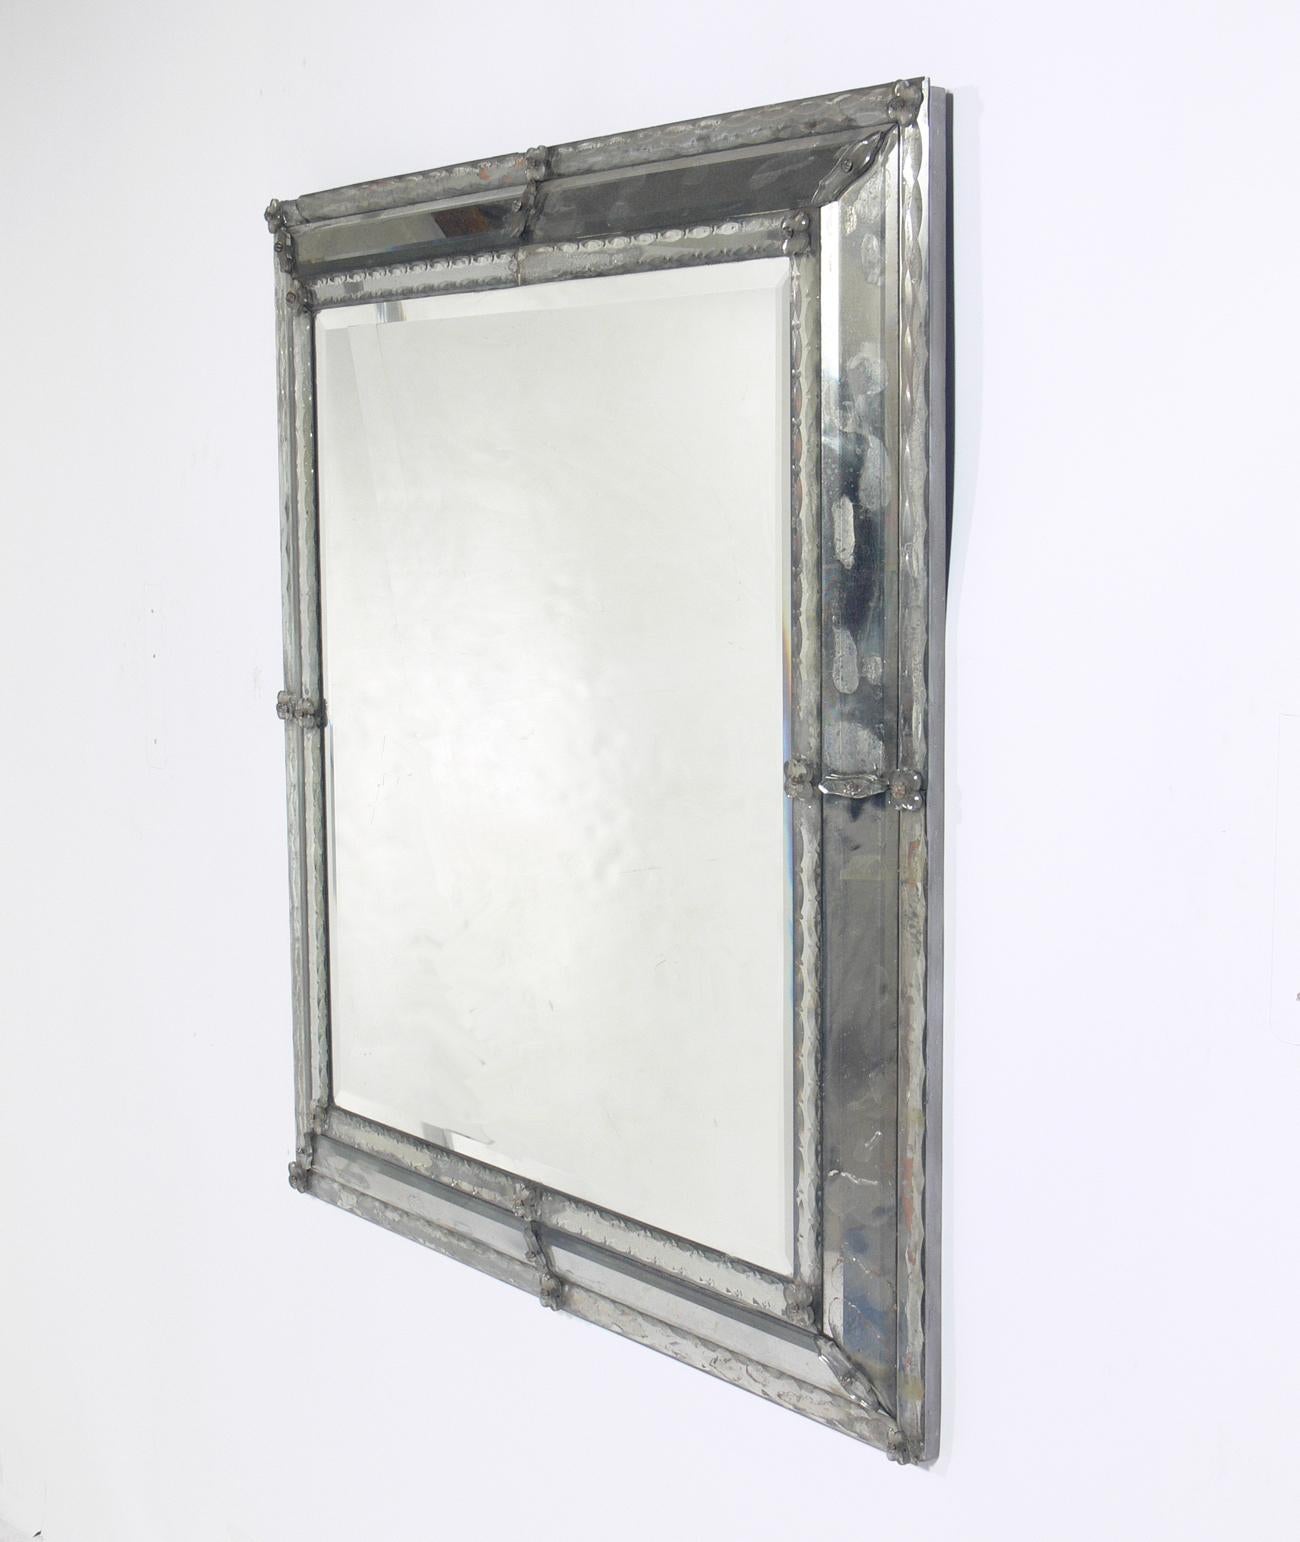 Large scale square Venetian mirror, Italy, at least circa 1940s, possibly much earlier. Retains wonderful original patina.